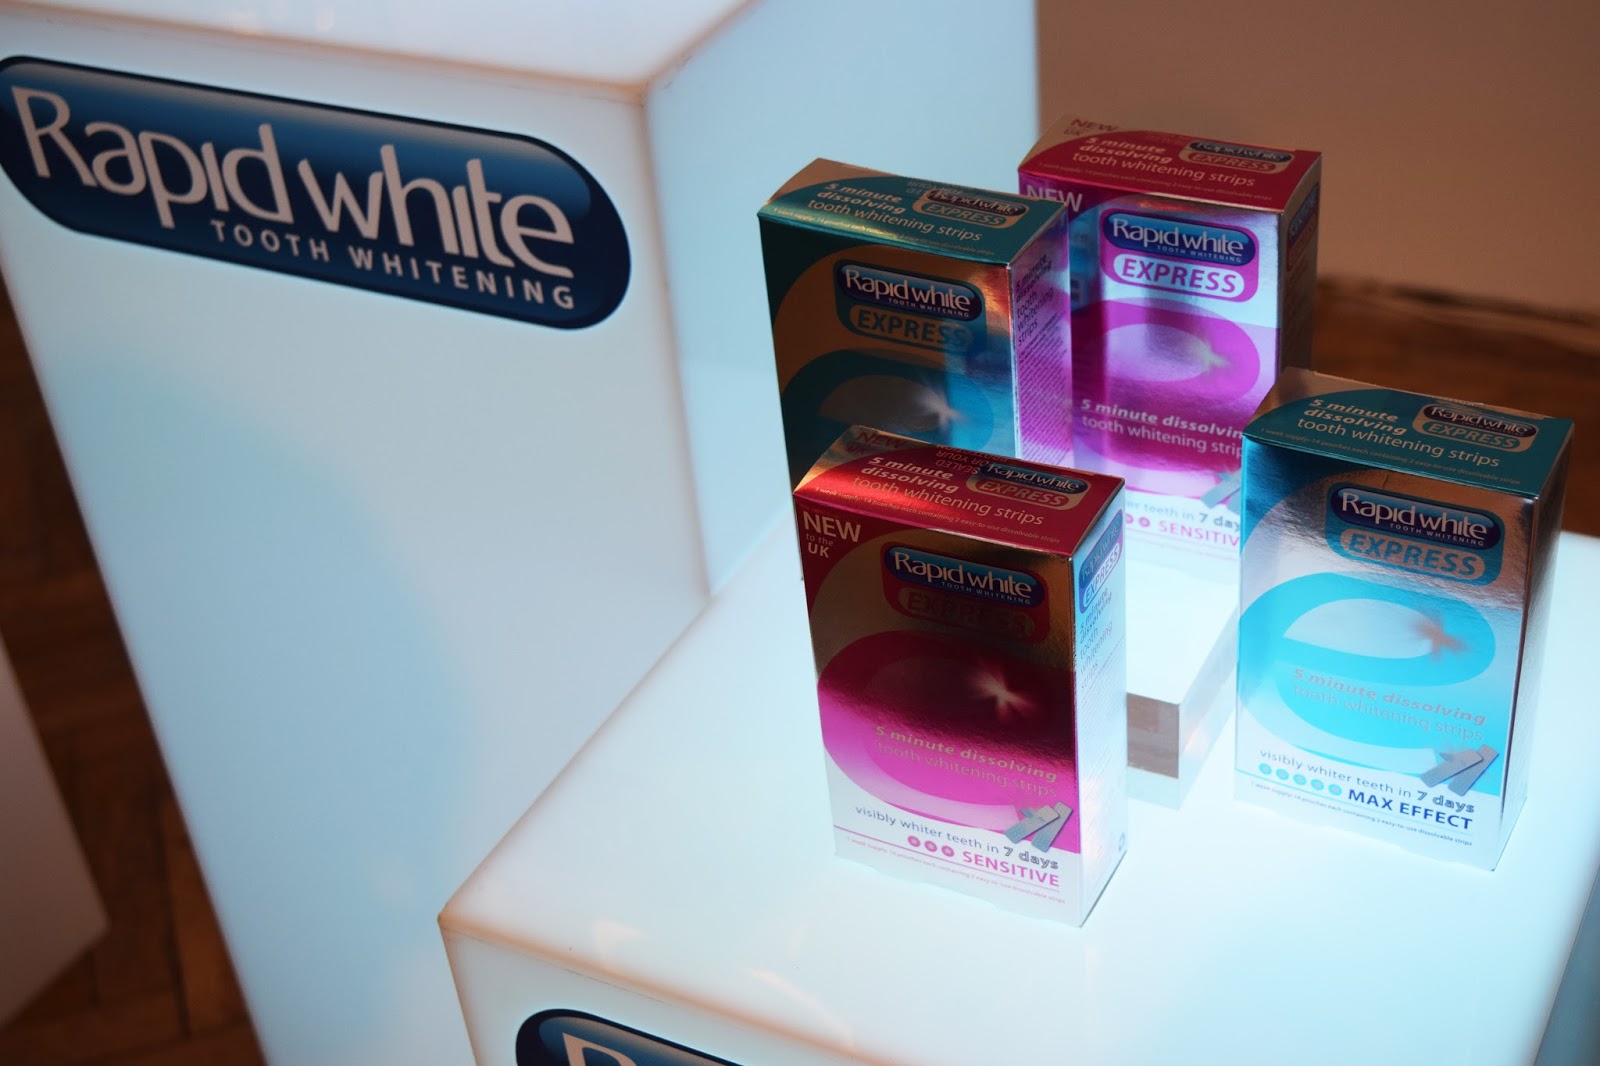 a rapid white stand showing their range of teeth whitening kits